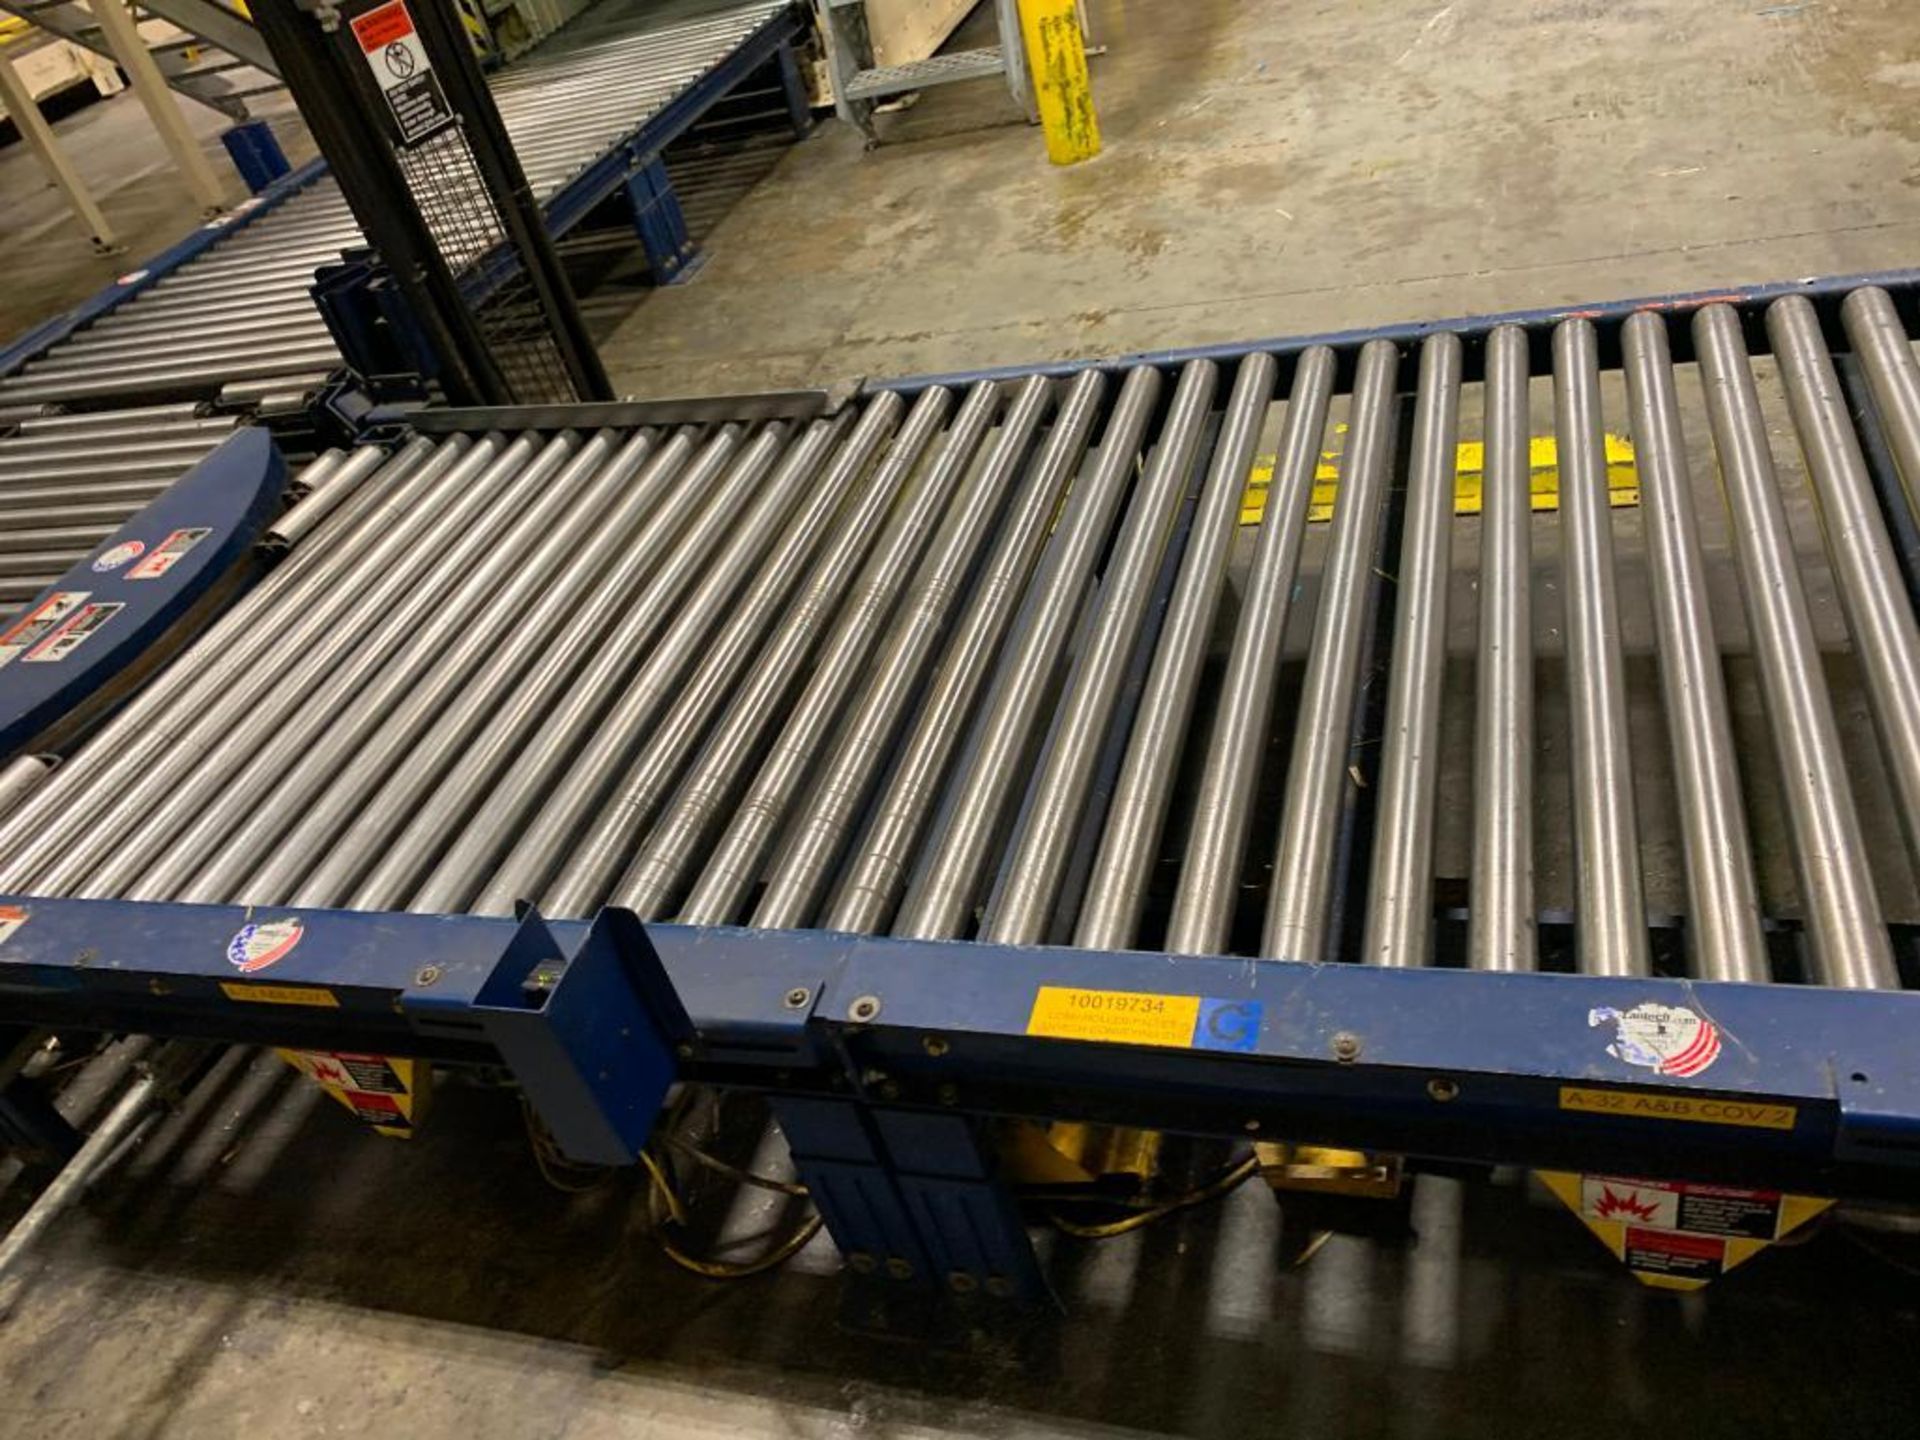 (6) skids of Lantech full pallet conveyor including turntable section - Located in Tifton, GA - Image 2 of 19